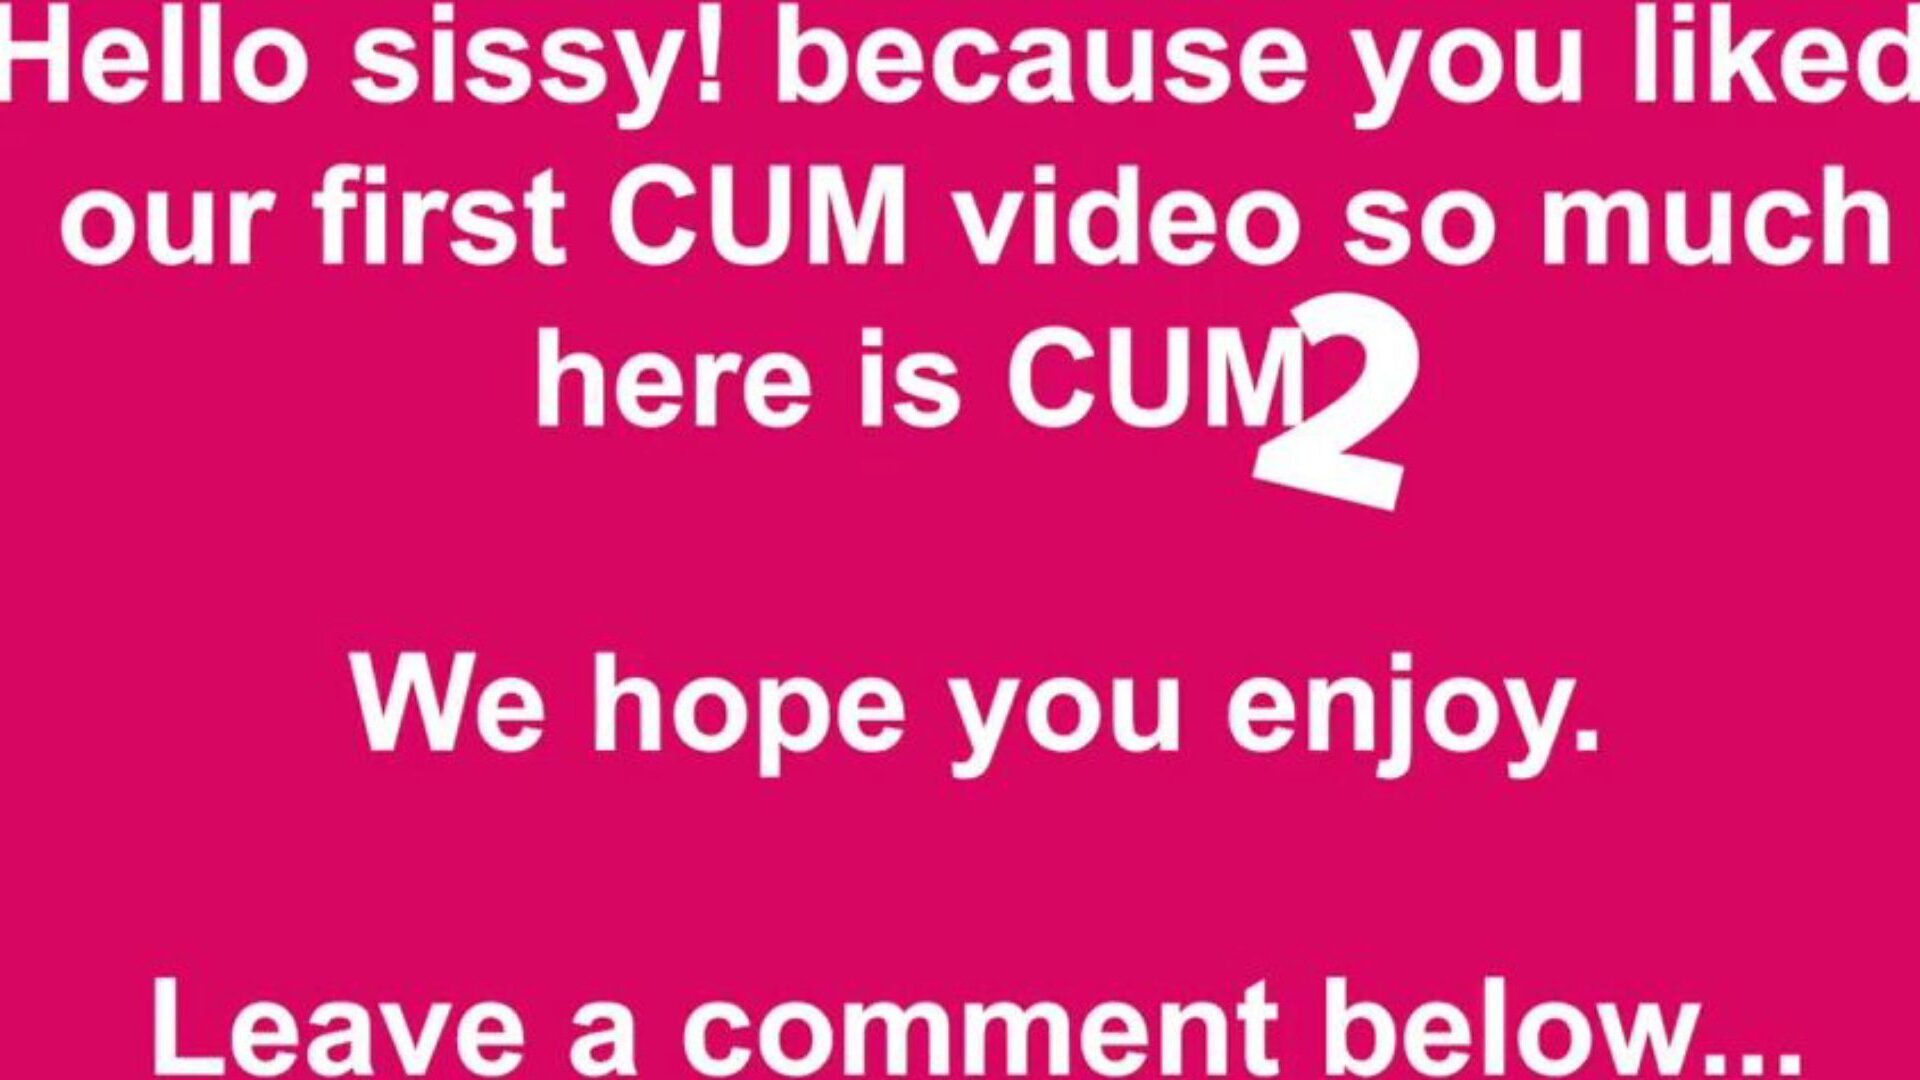 cum two free cum & cumming tube porn videos 49 - xhamster watch cum two tube fuck-a-thon video for free on xhamster, with the imperious collection of free cum cumming tube & tube 2 hd pornó film epizódok